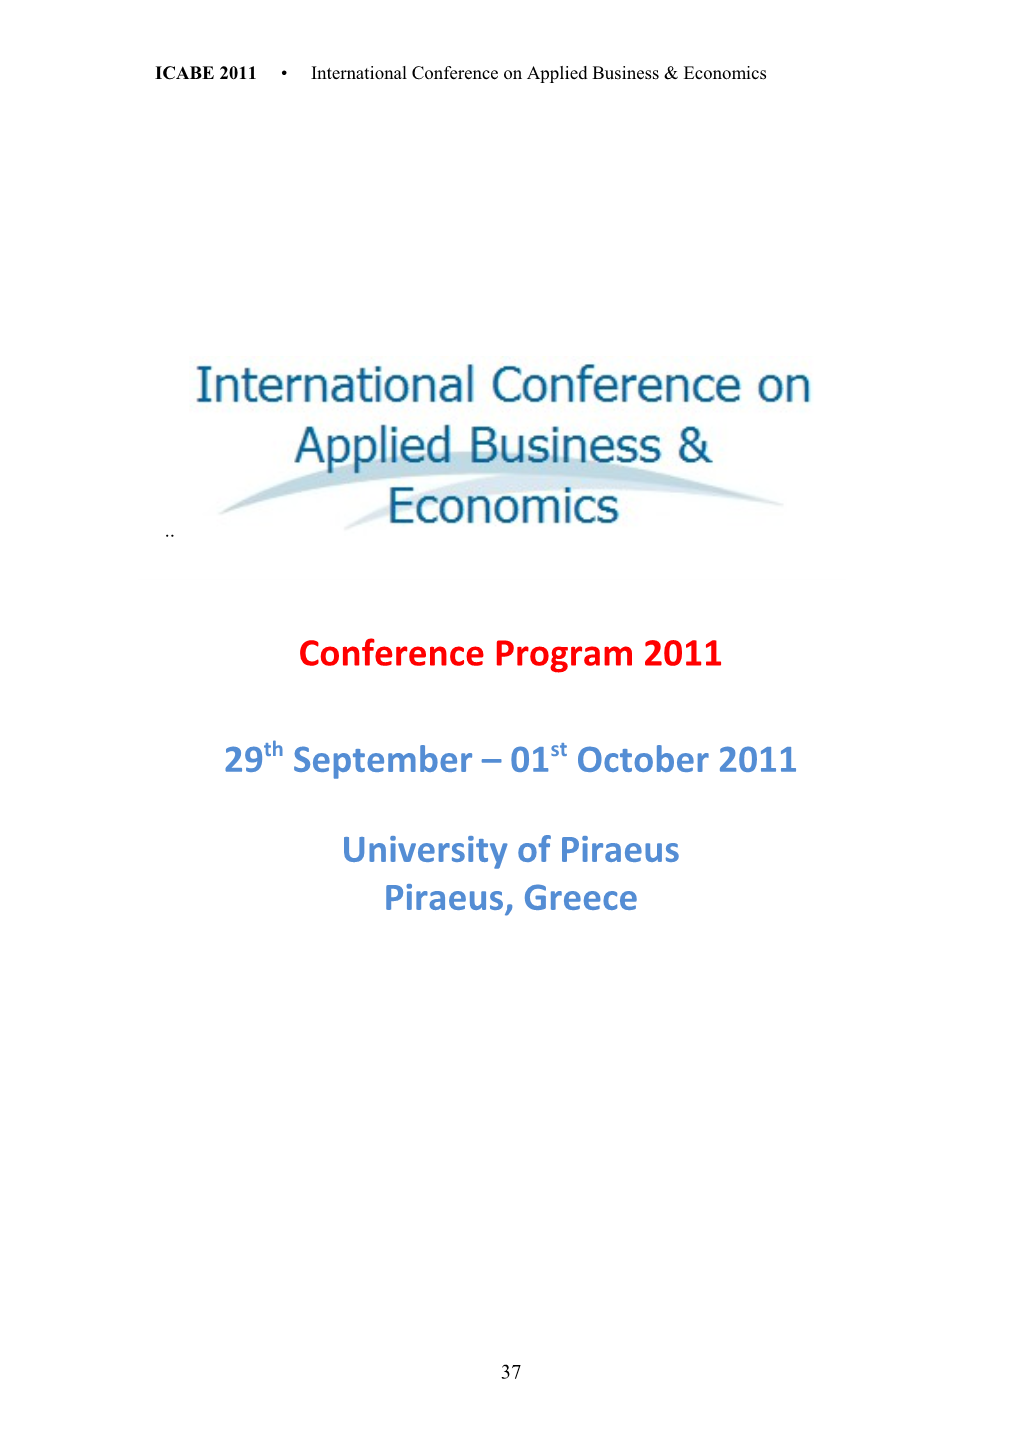 ICABE 2011 International Conference on Applied Business & Economics